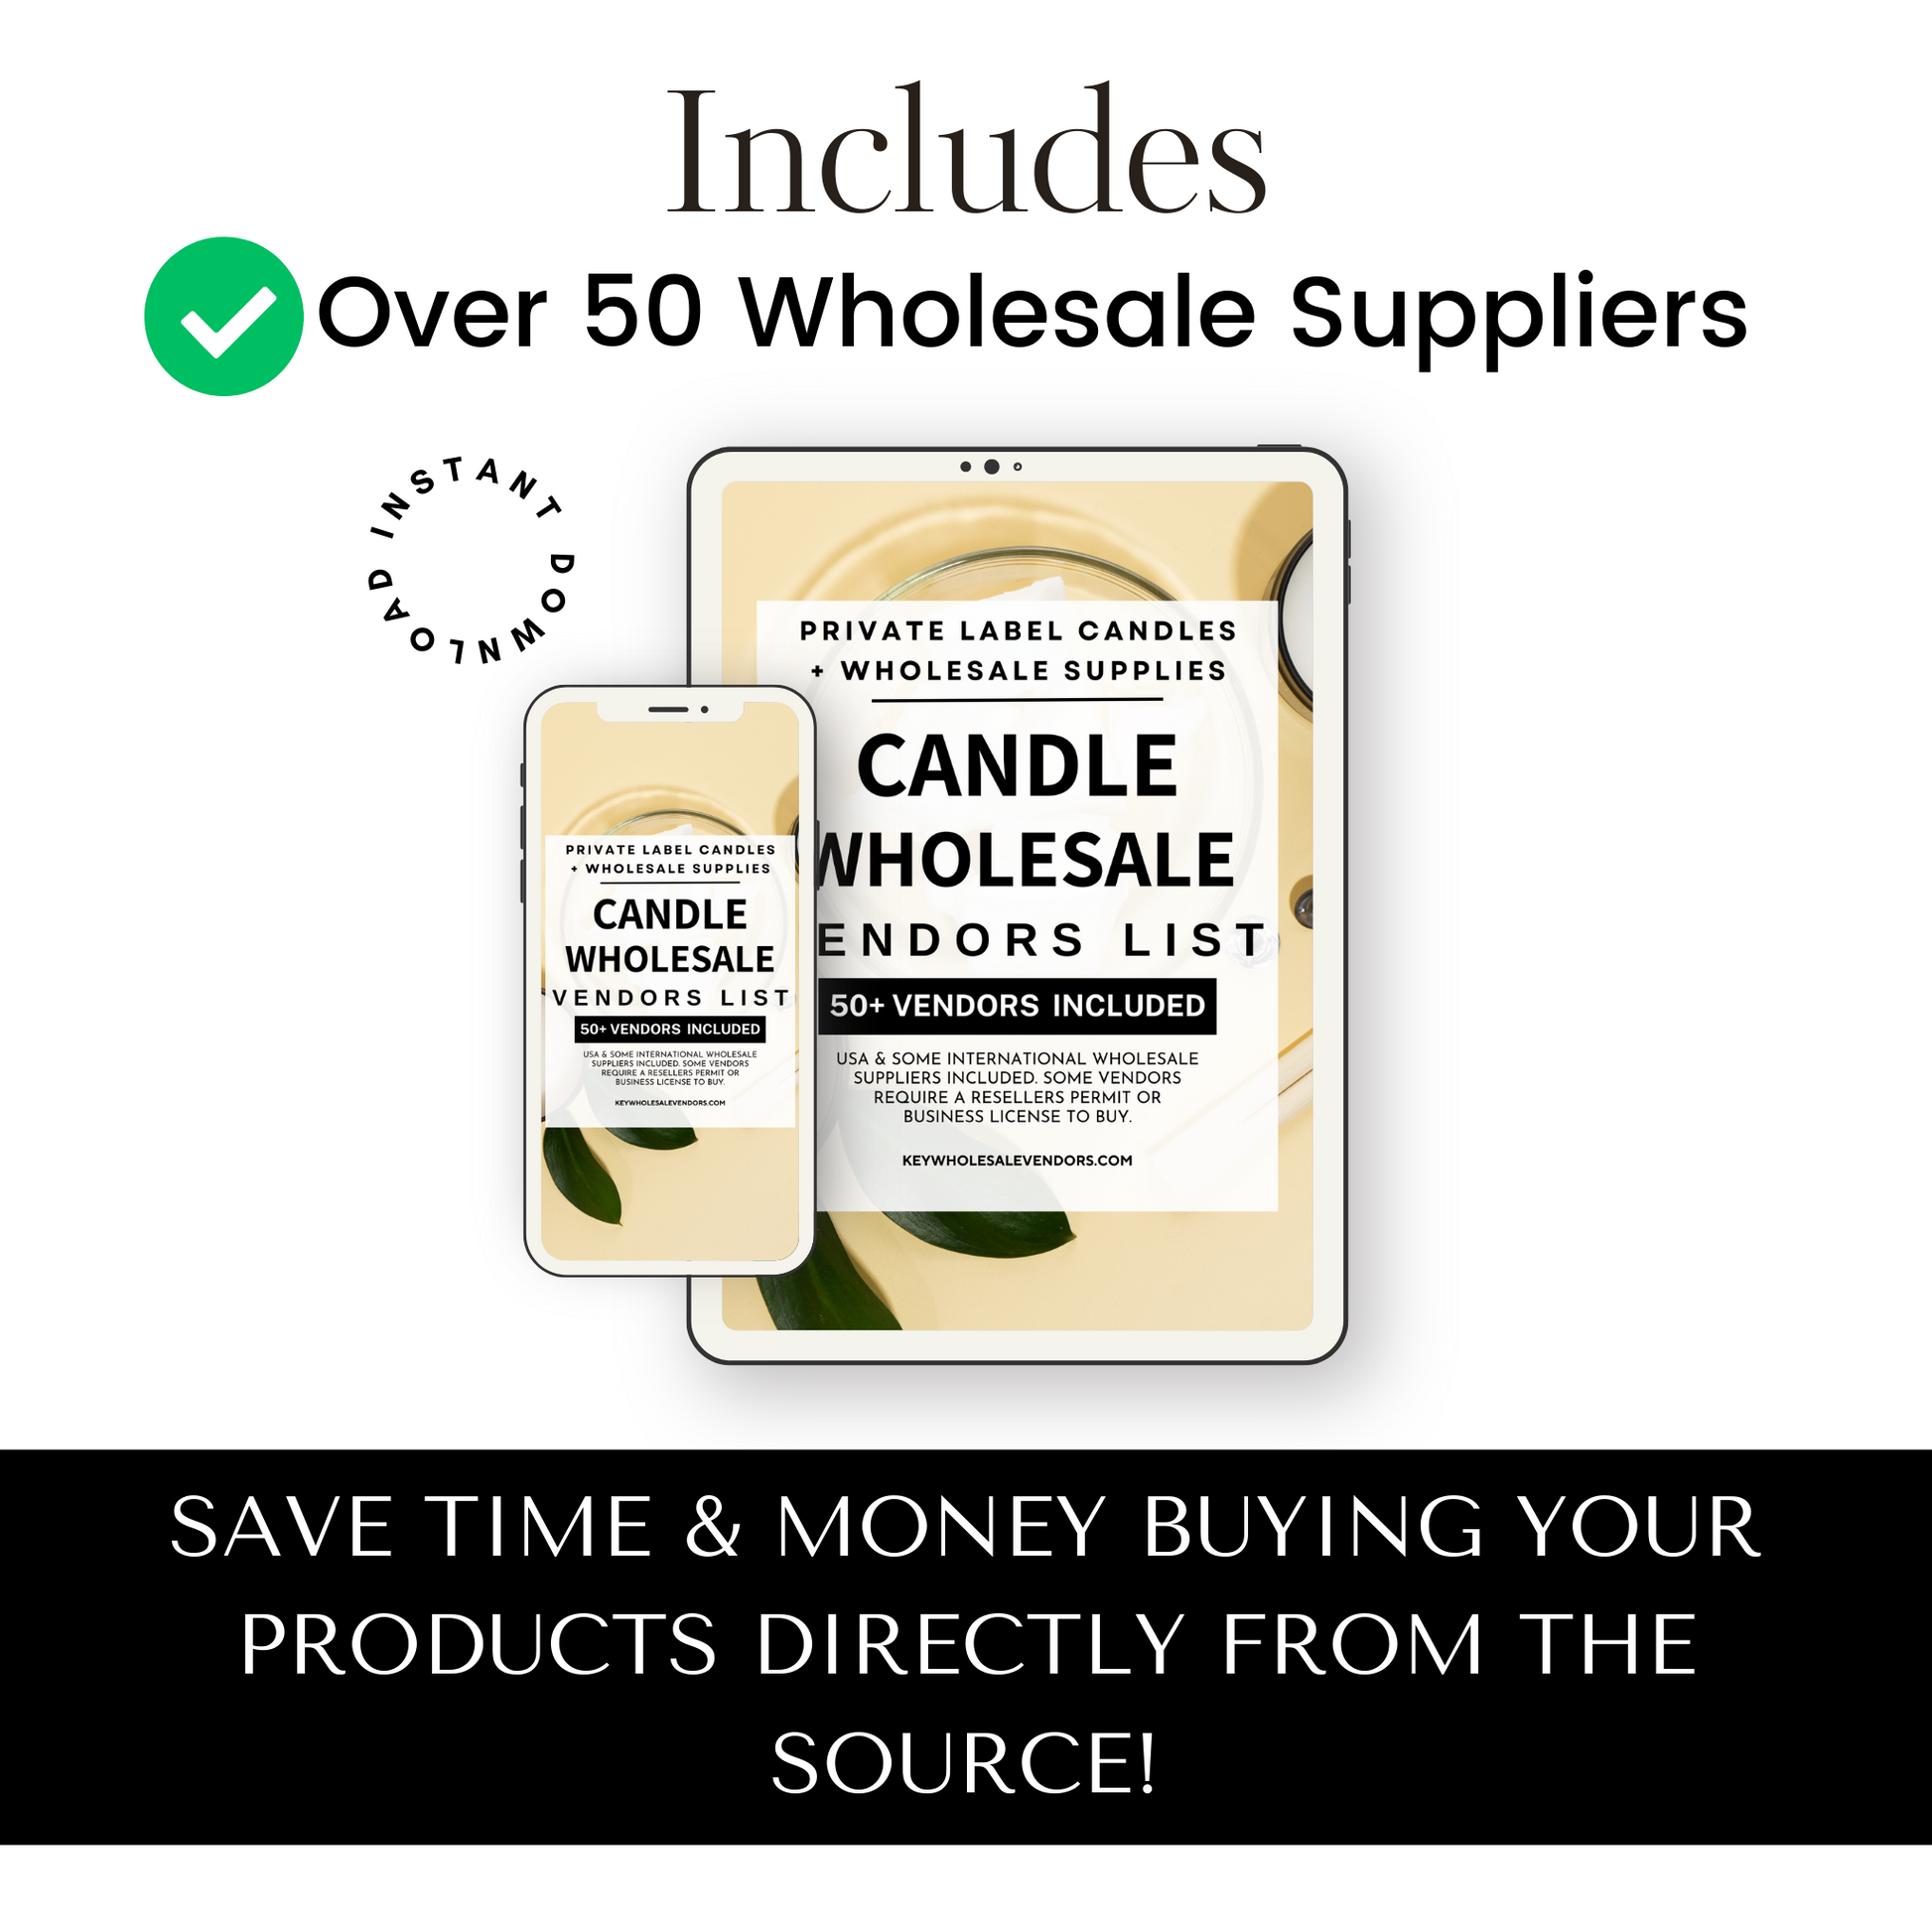 7 Places to Get Candle Making Supplies for Your Business